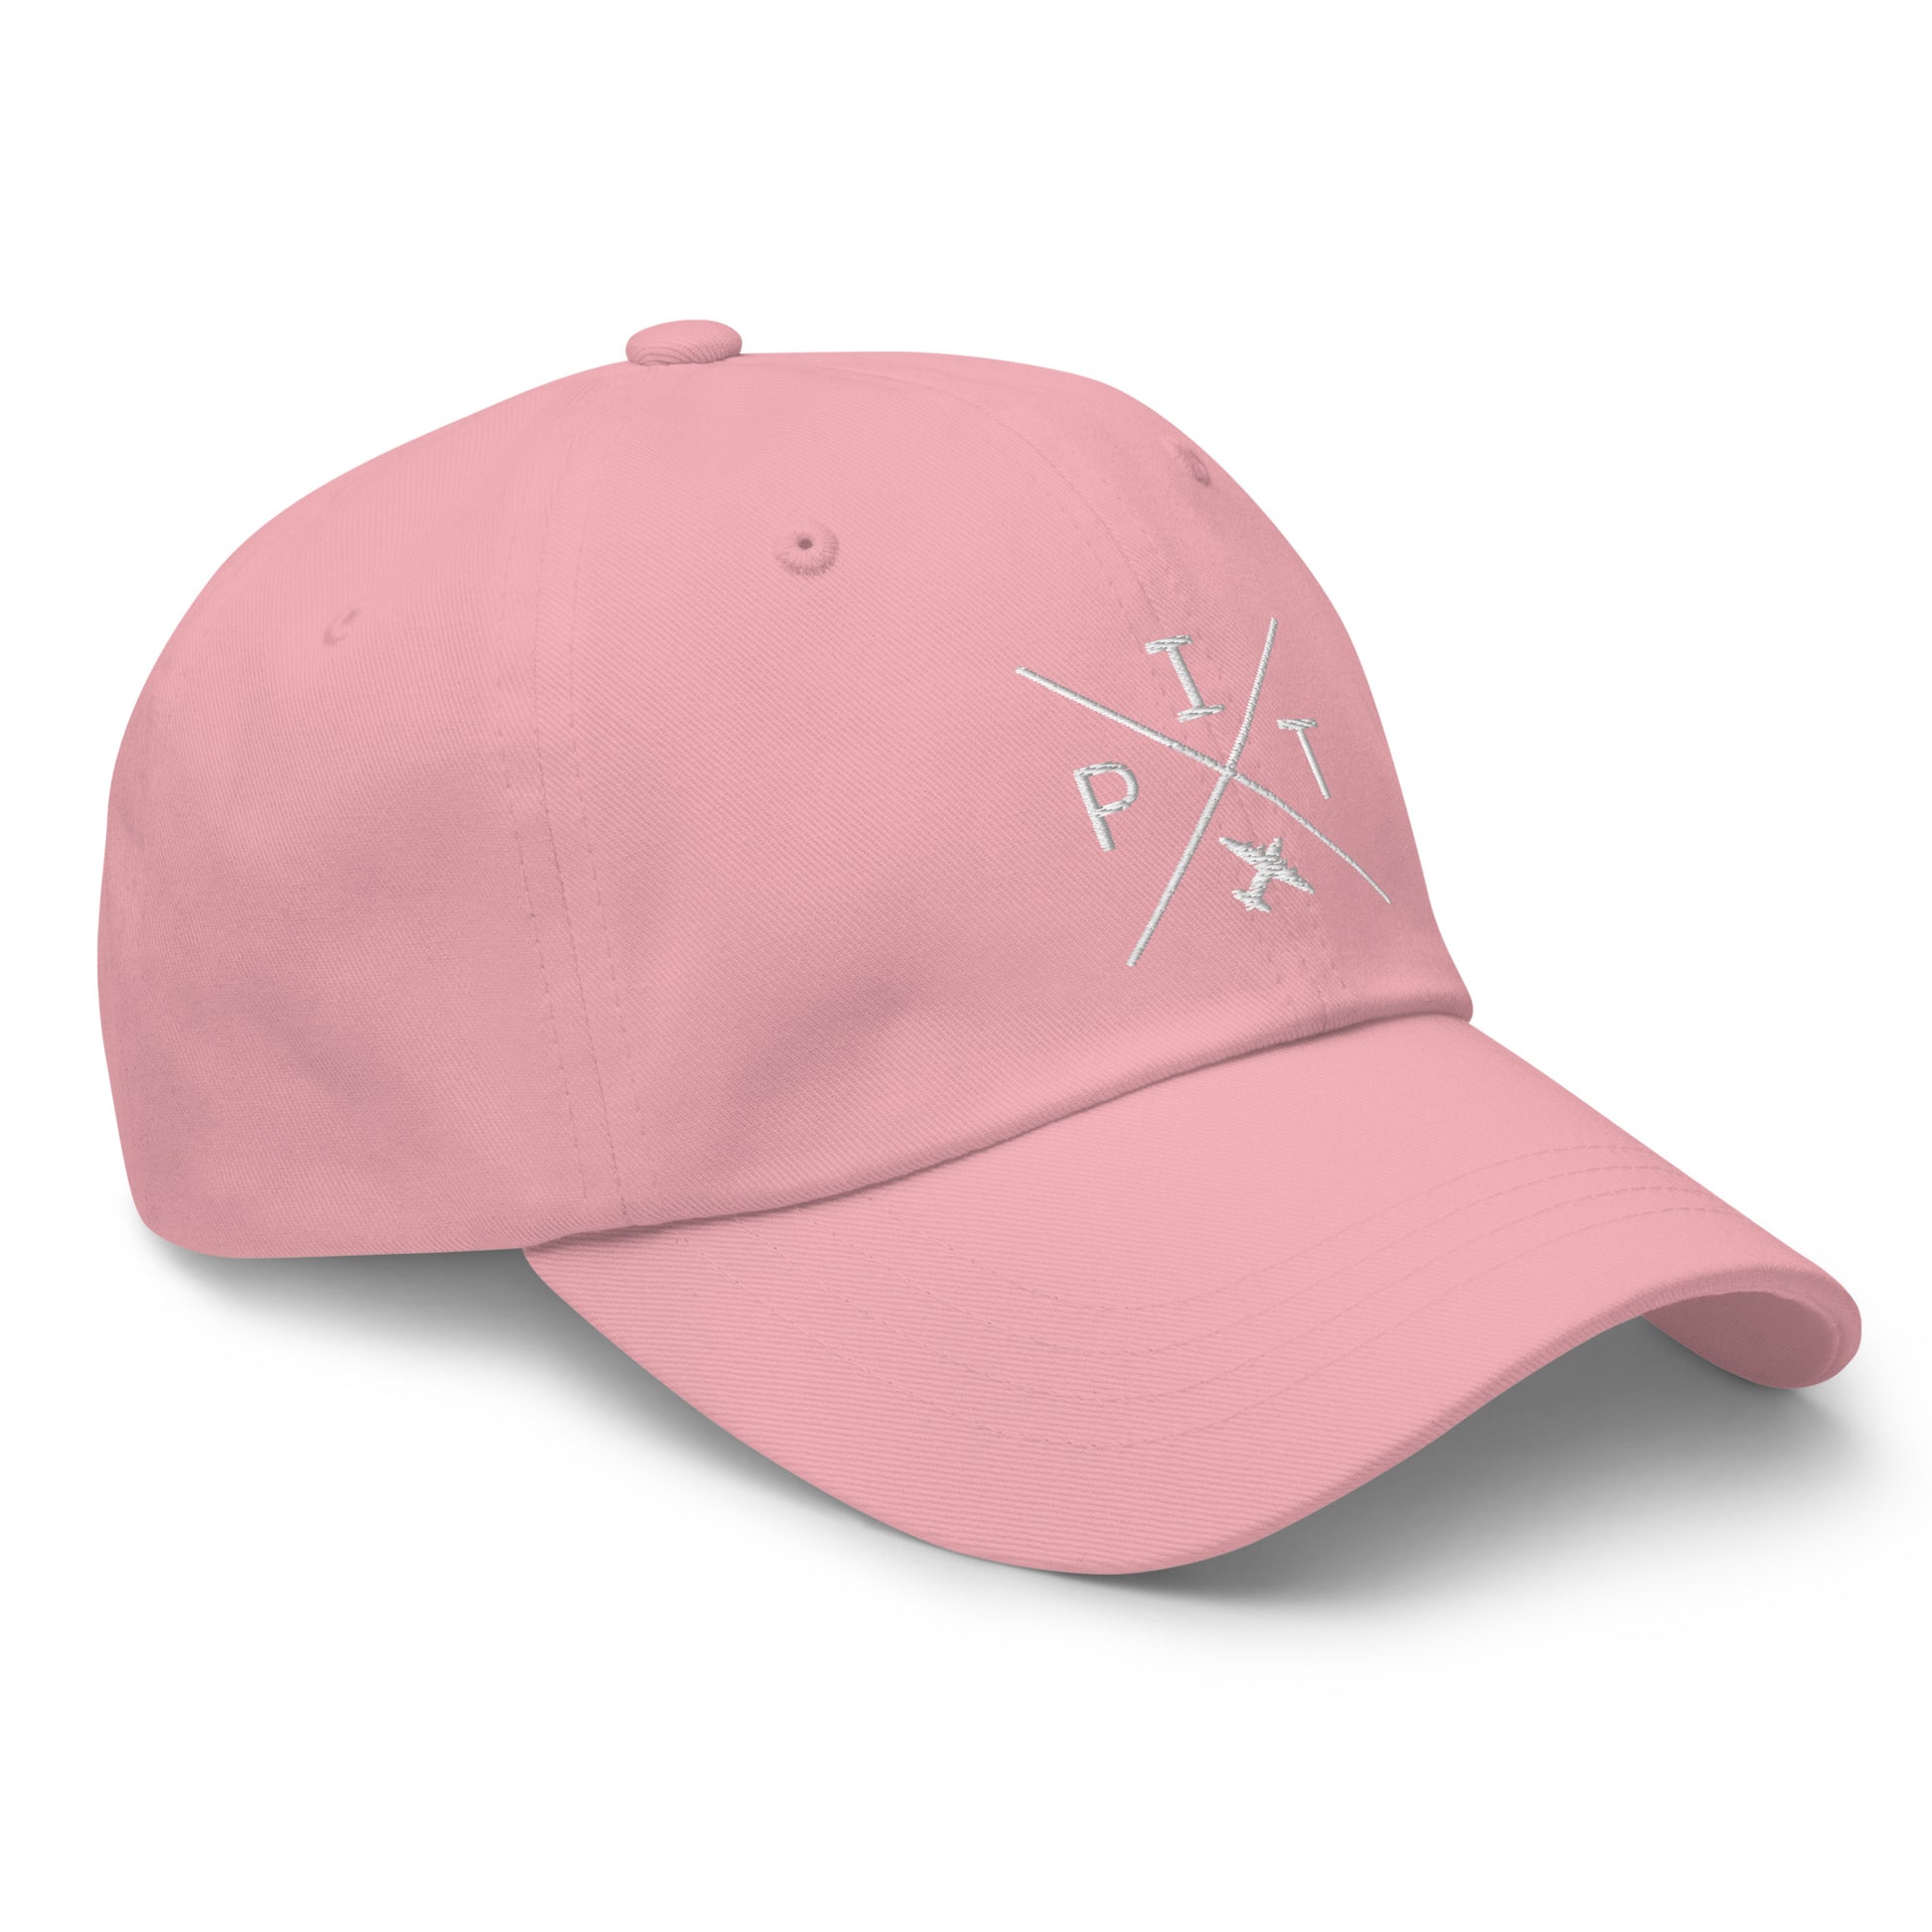 Crossed-X Dad Hat - White • PIT Pittsburgh • YHM Designs - Image 26